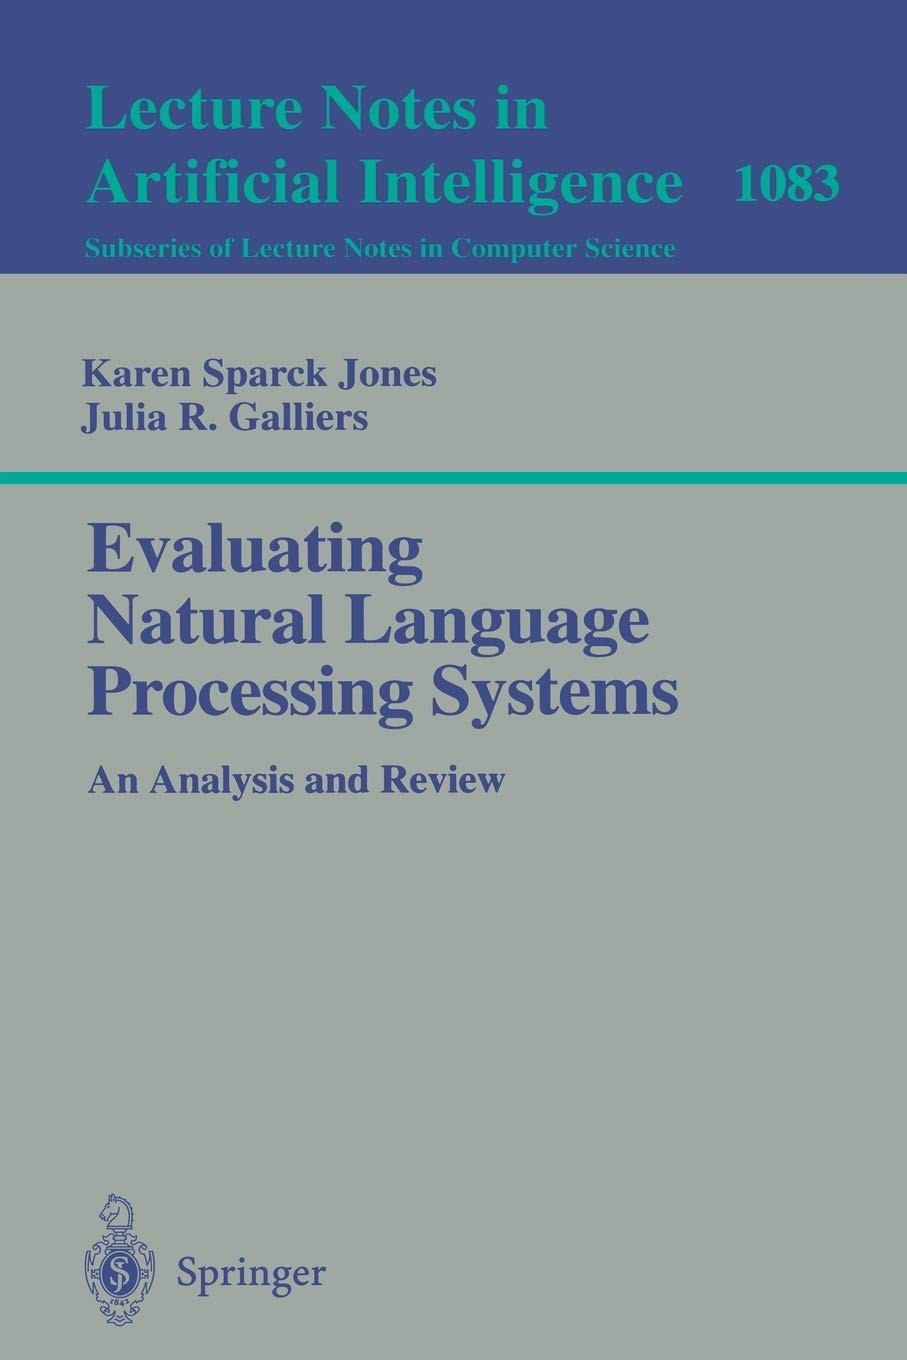 Evaluating Natural Language Processing Systems: An Analysis and Review